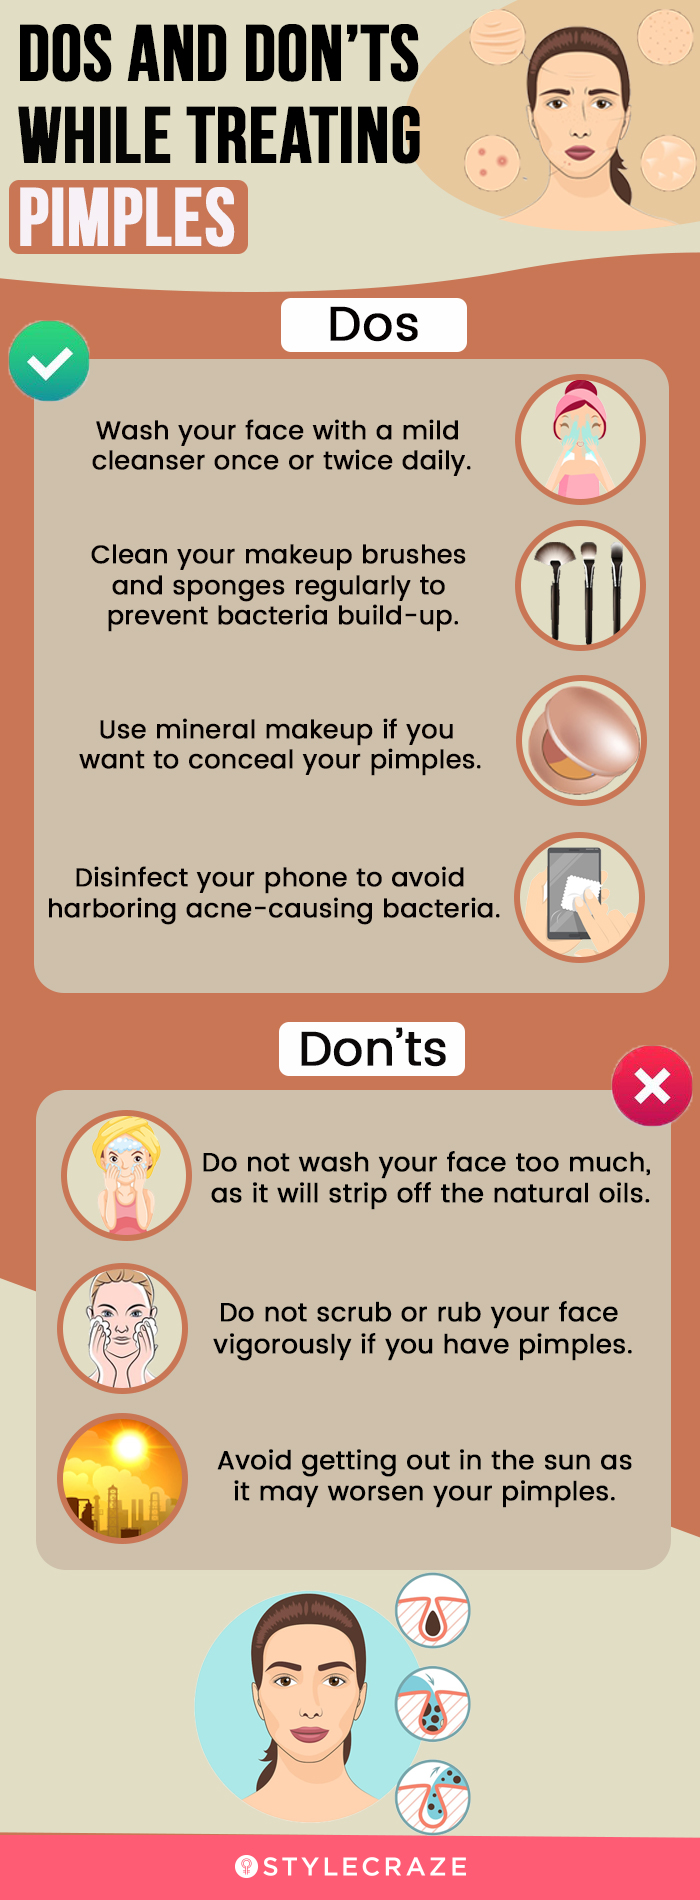 dos and don’ts while treating pimples (infographic)